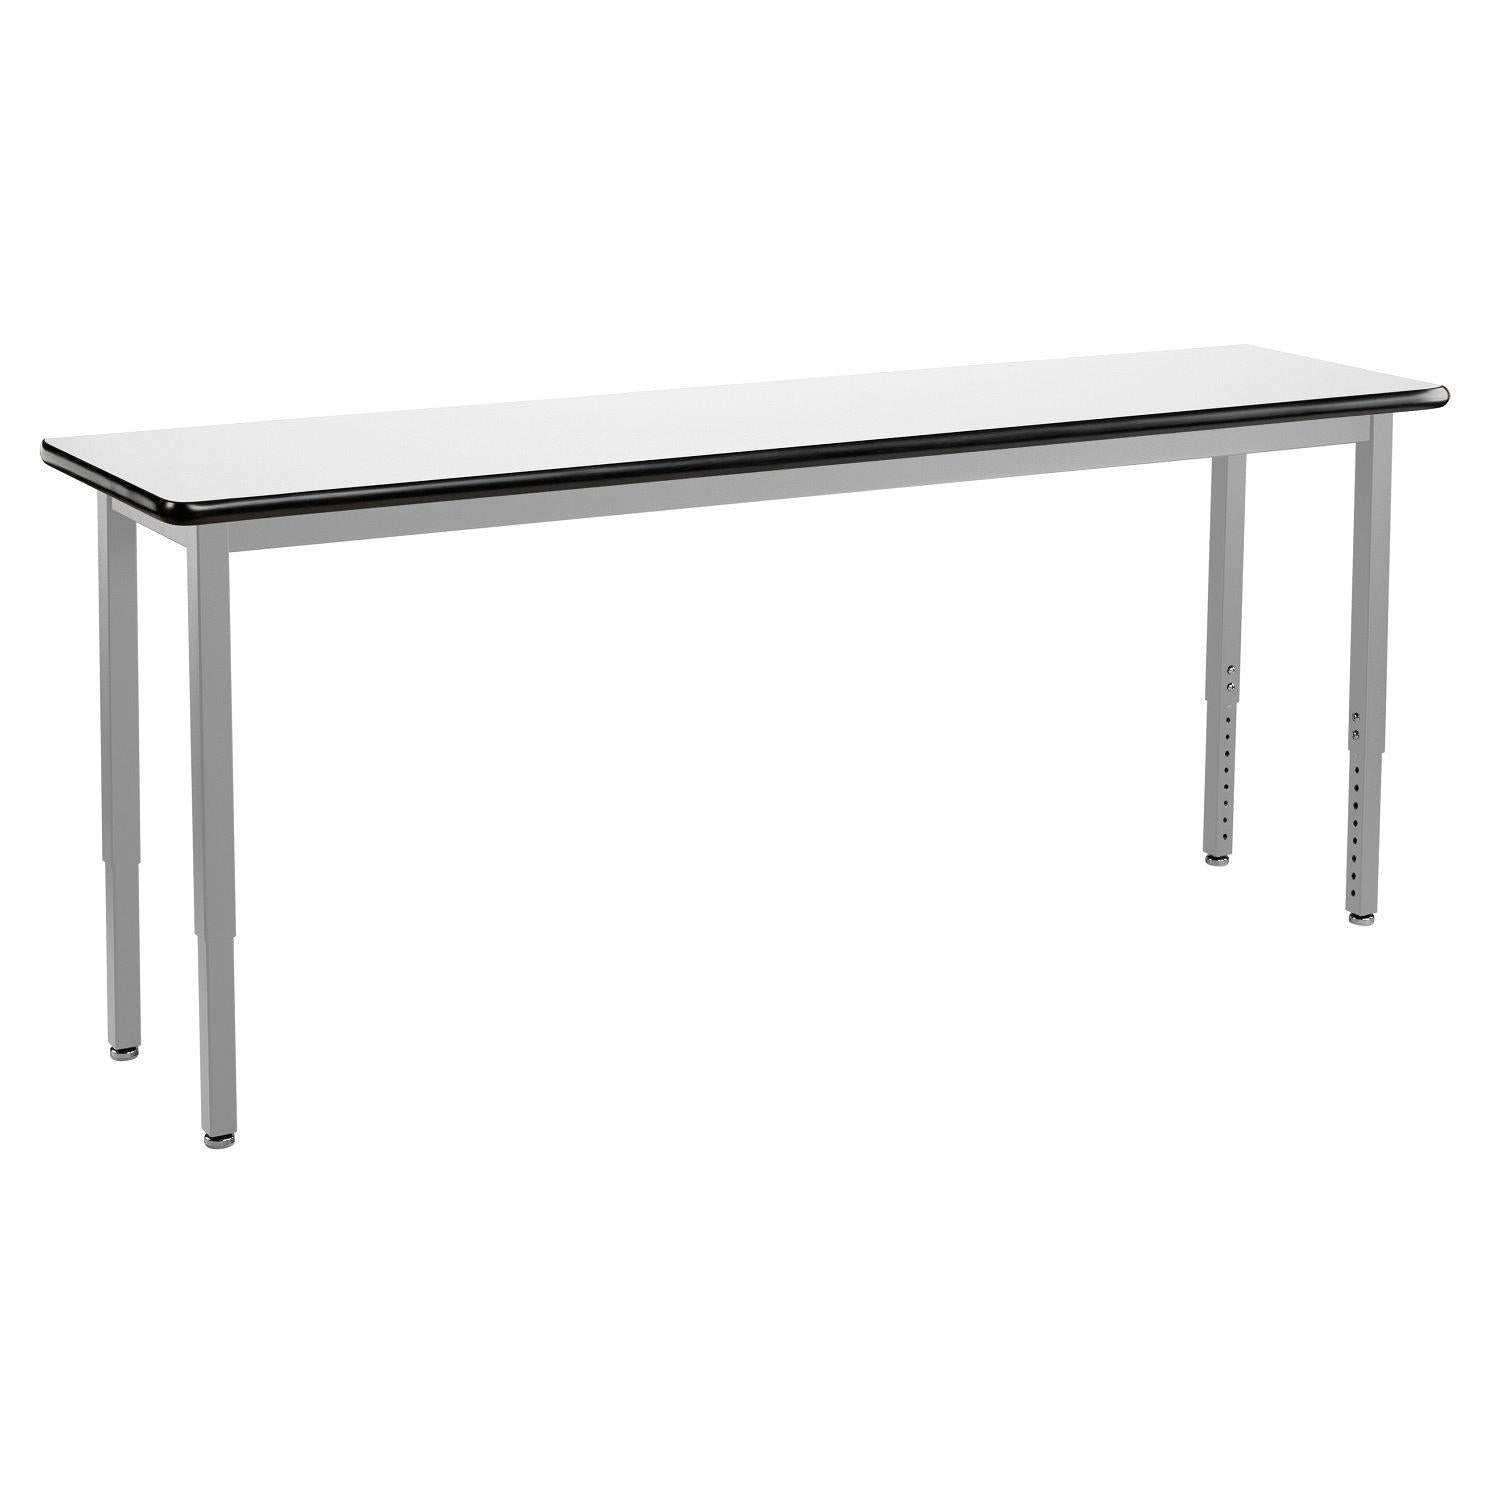 Heavy-Duty Height-Adjustable Utility Table, Soft Grey Frame, 18" x 72", Whiteboard High-Pressure Laminate Top